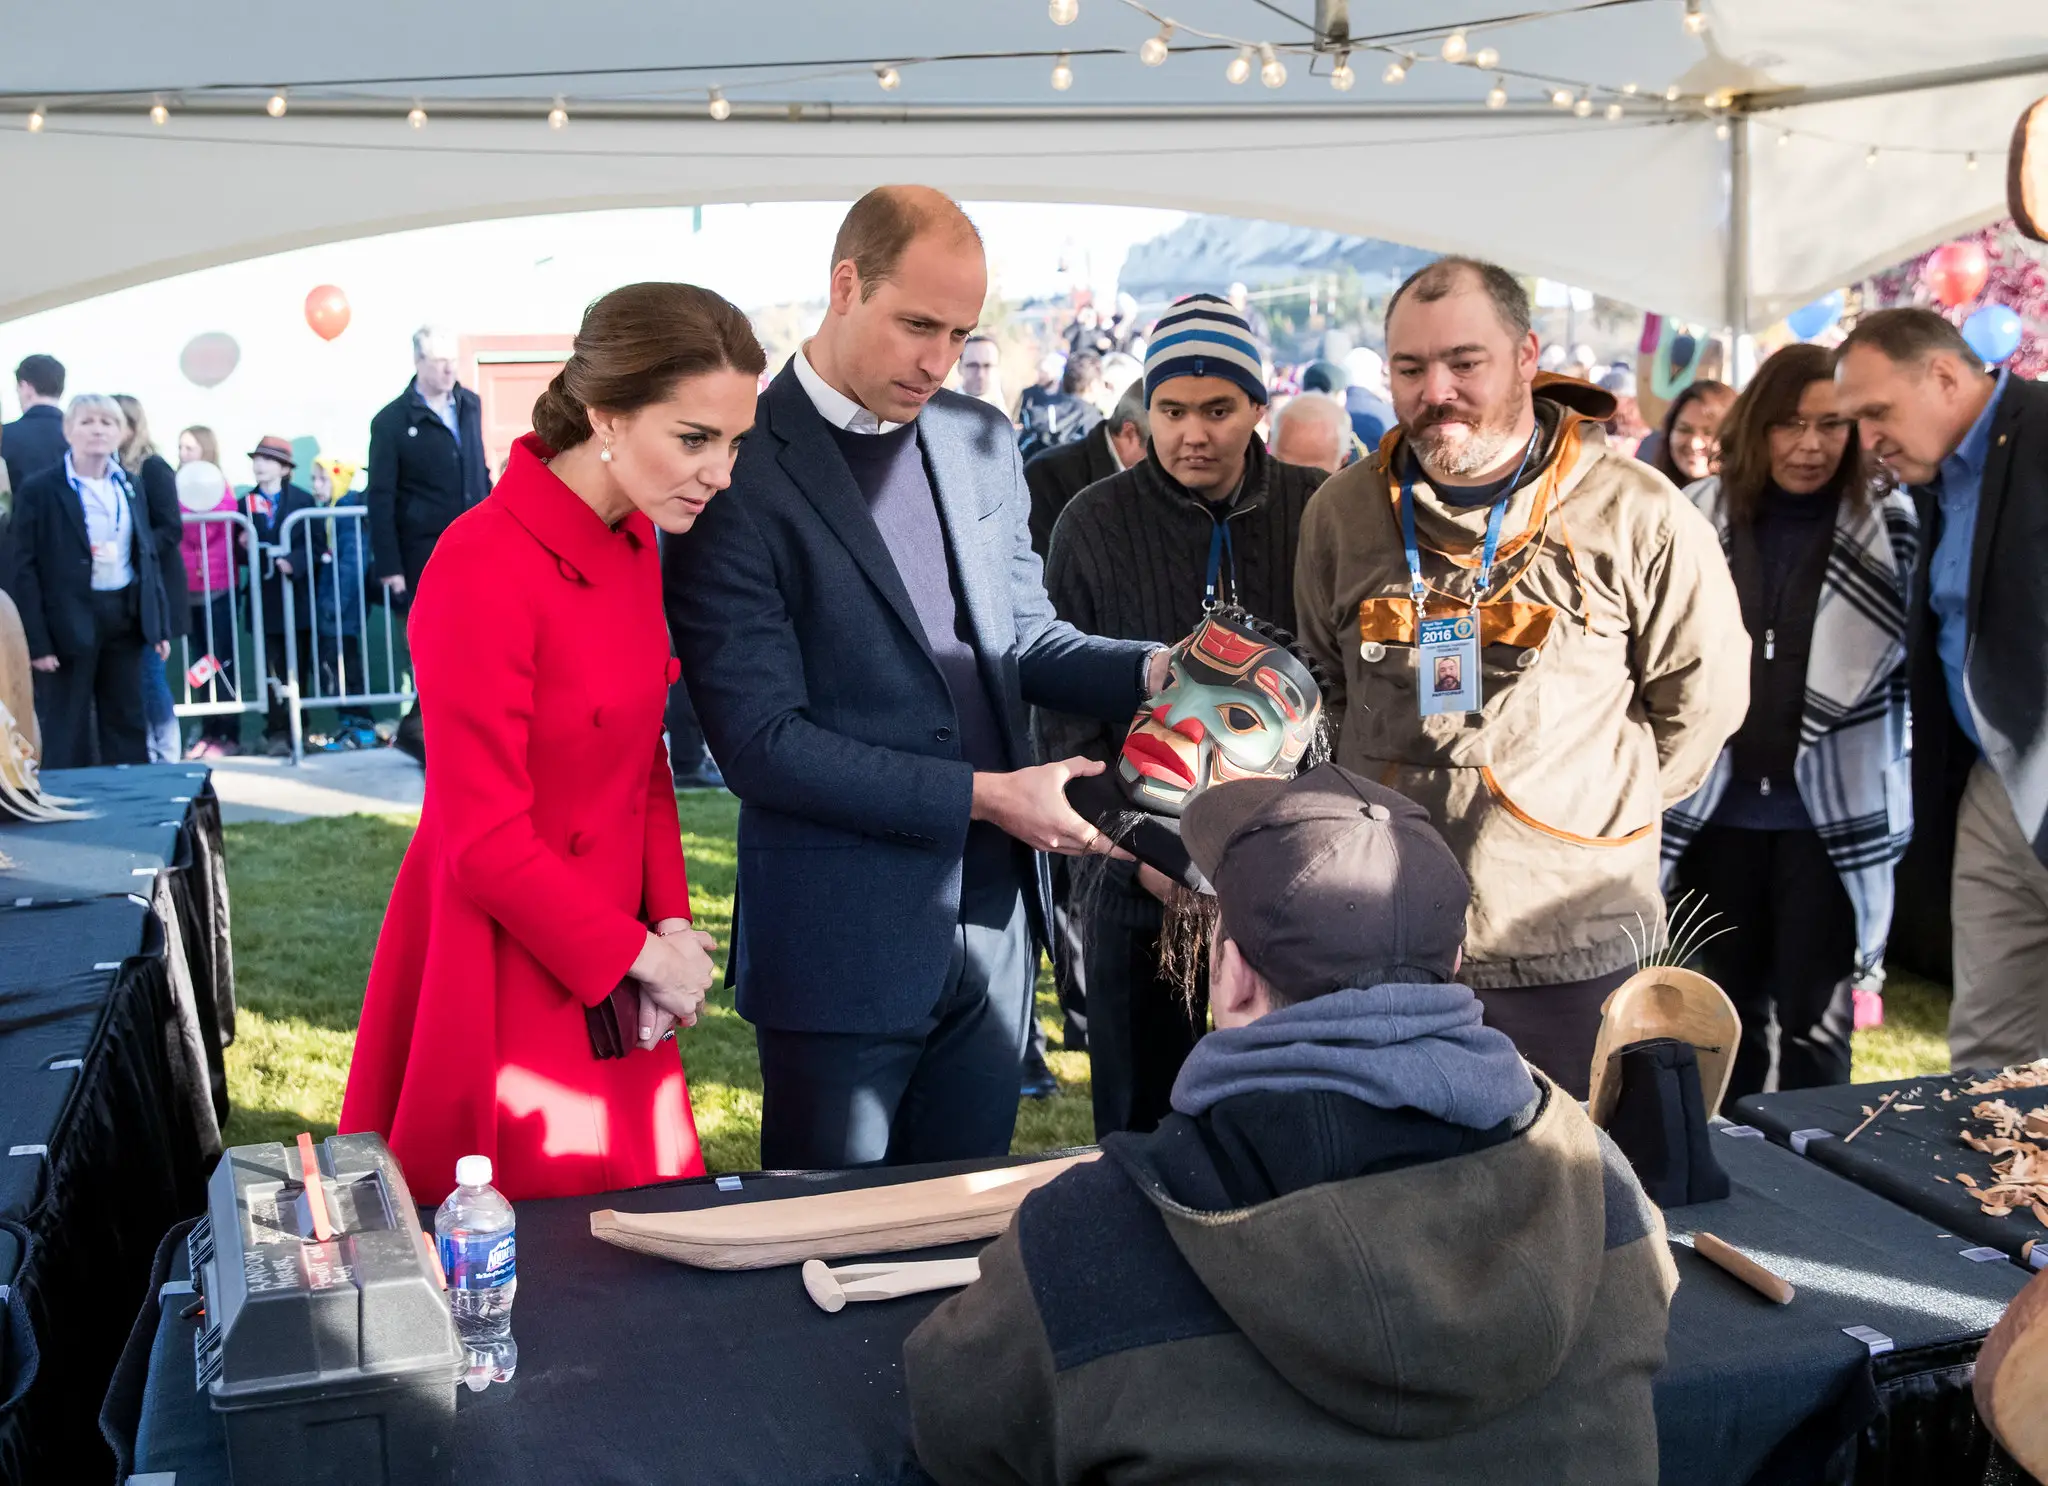 The Duke and Duchess of cambridge at street party in whitehorse